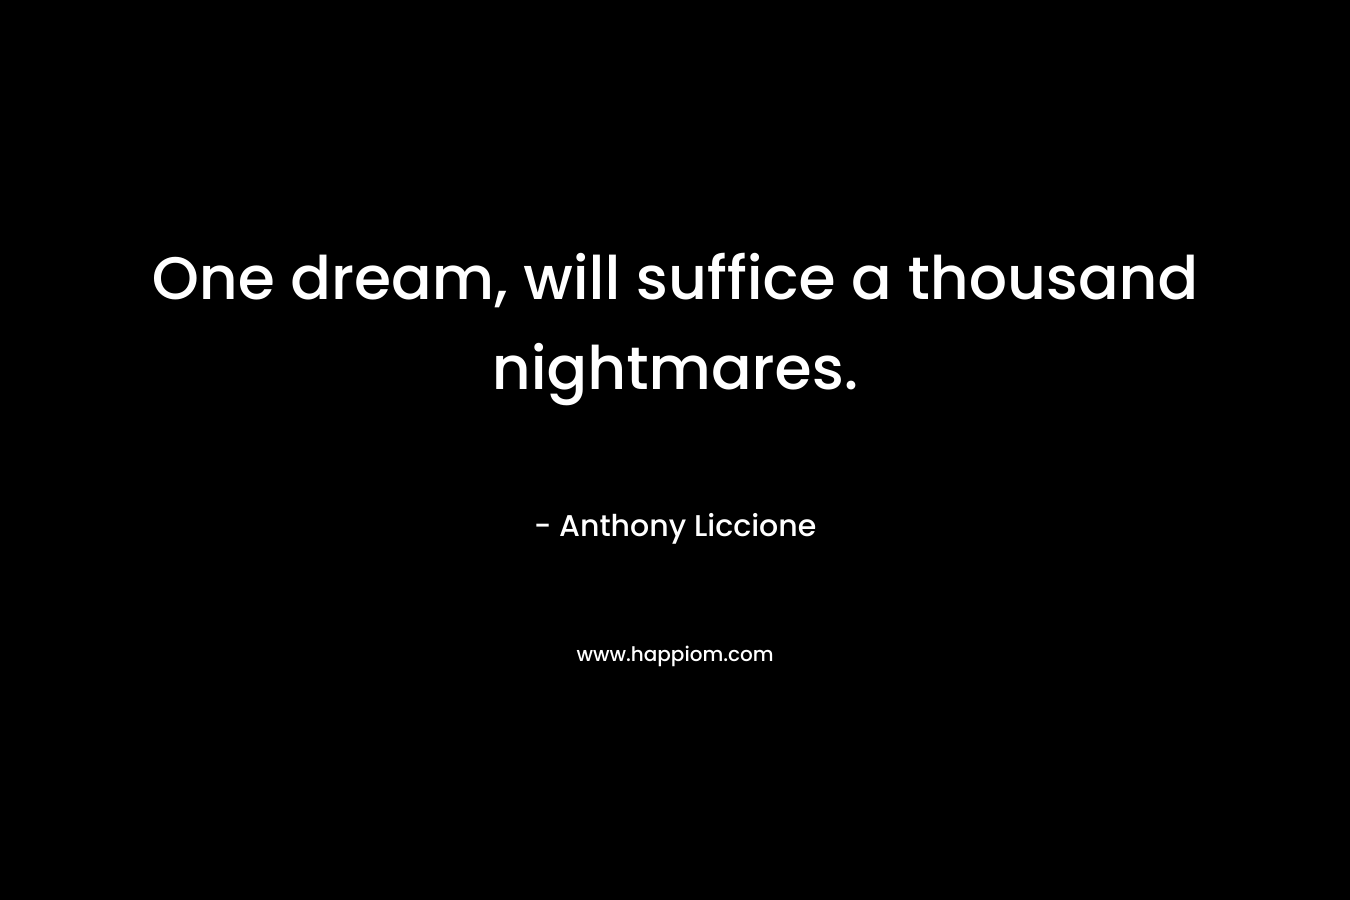 One dream, will suffice a thousand nightmares. – Anthony Liccione